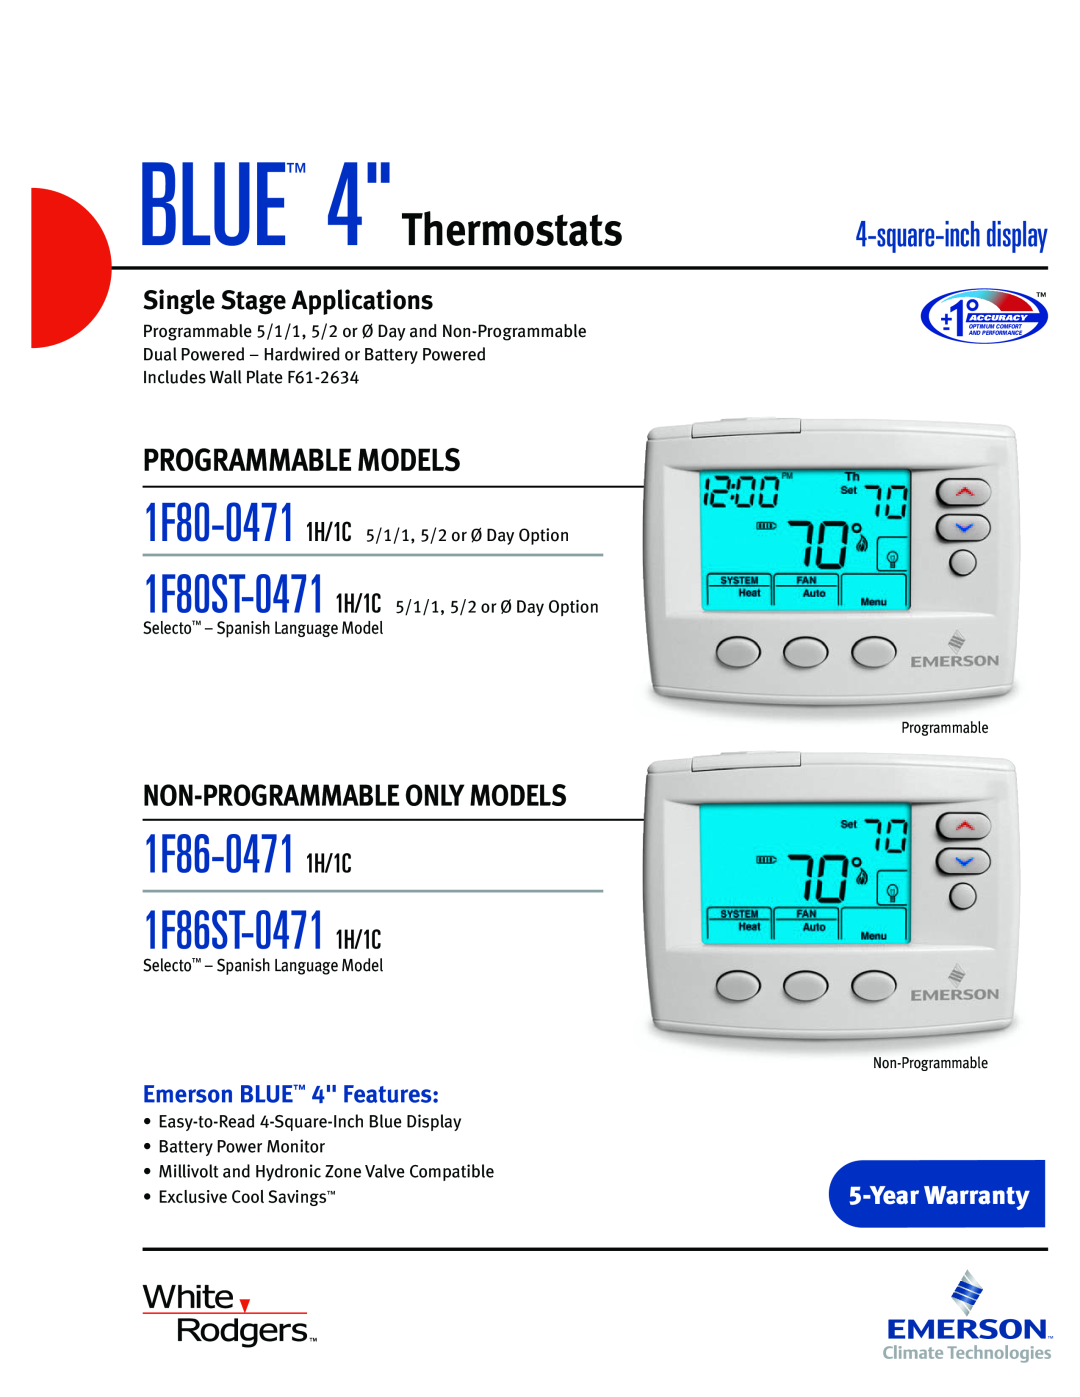 Emerson warranty 1F86-0471 1H/1C 1F86ST-0471 1H/1C, BLUE 4 Thermostats, Programmable Models, Single Stage Applications 